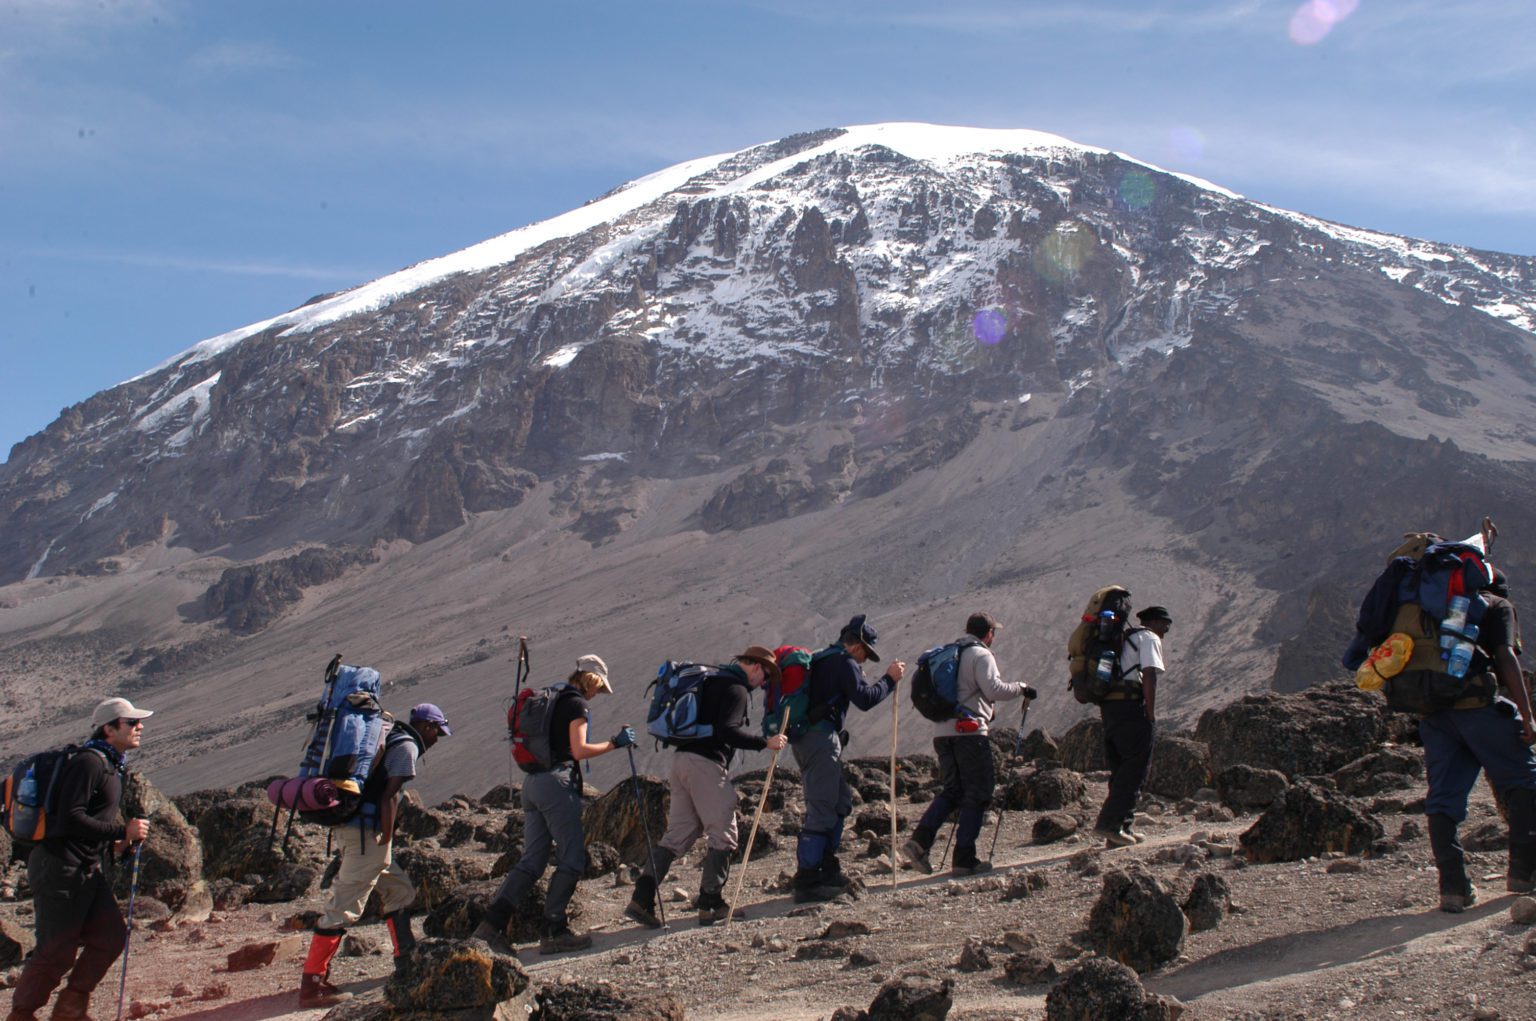 a group of hikers on our Mount Kilimanjaro climb to the peak